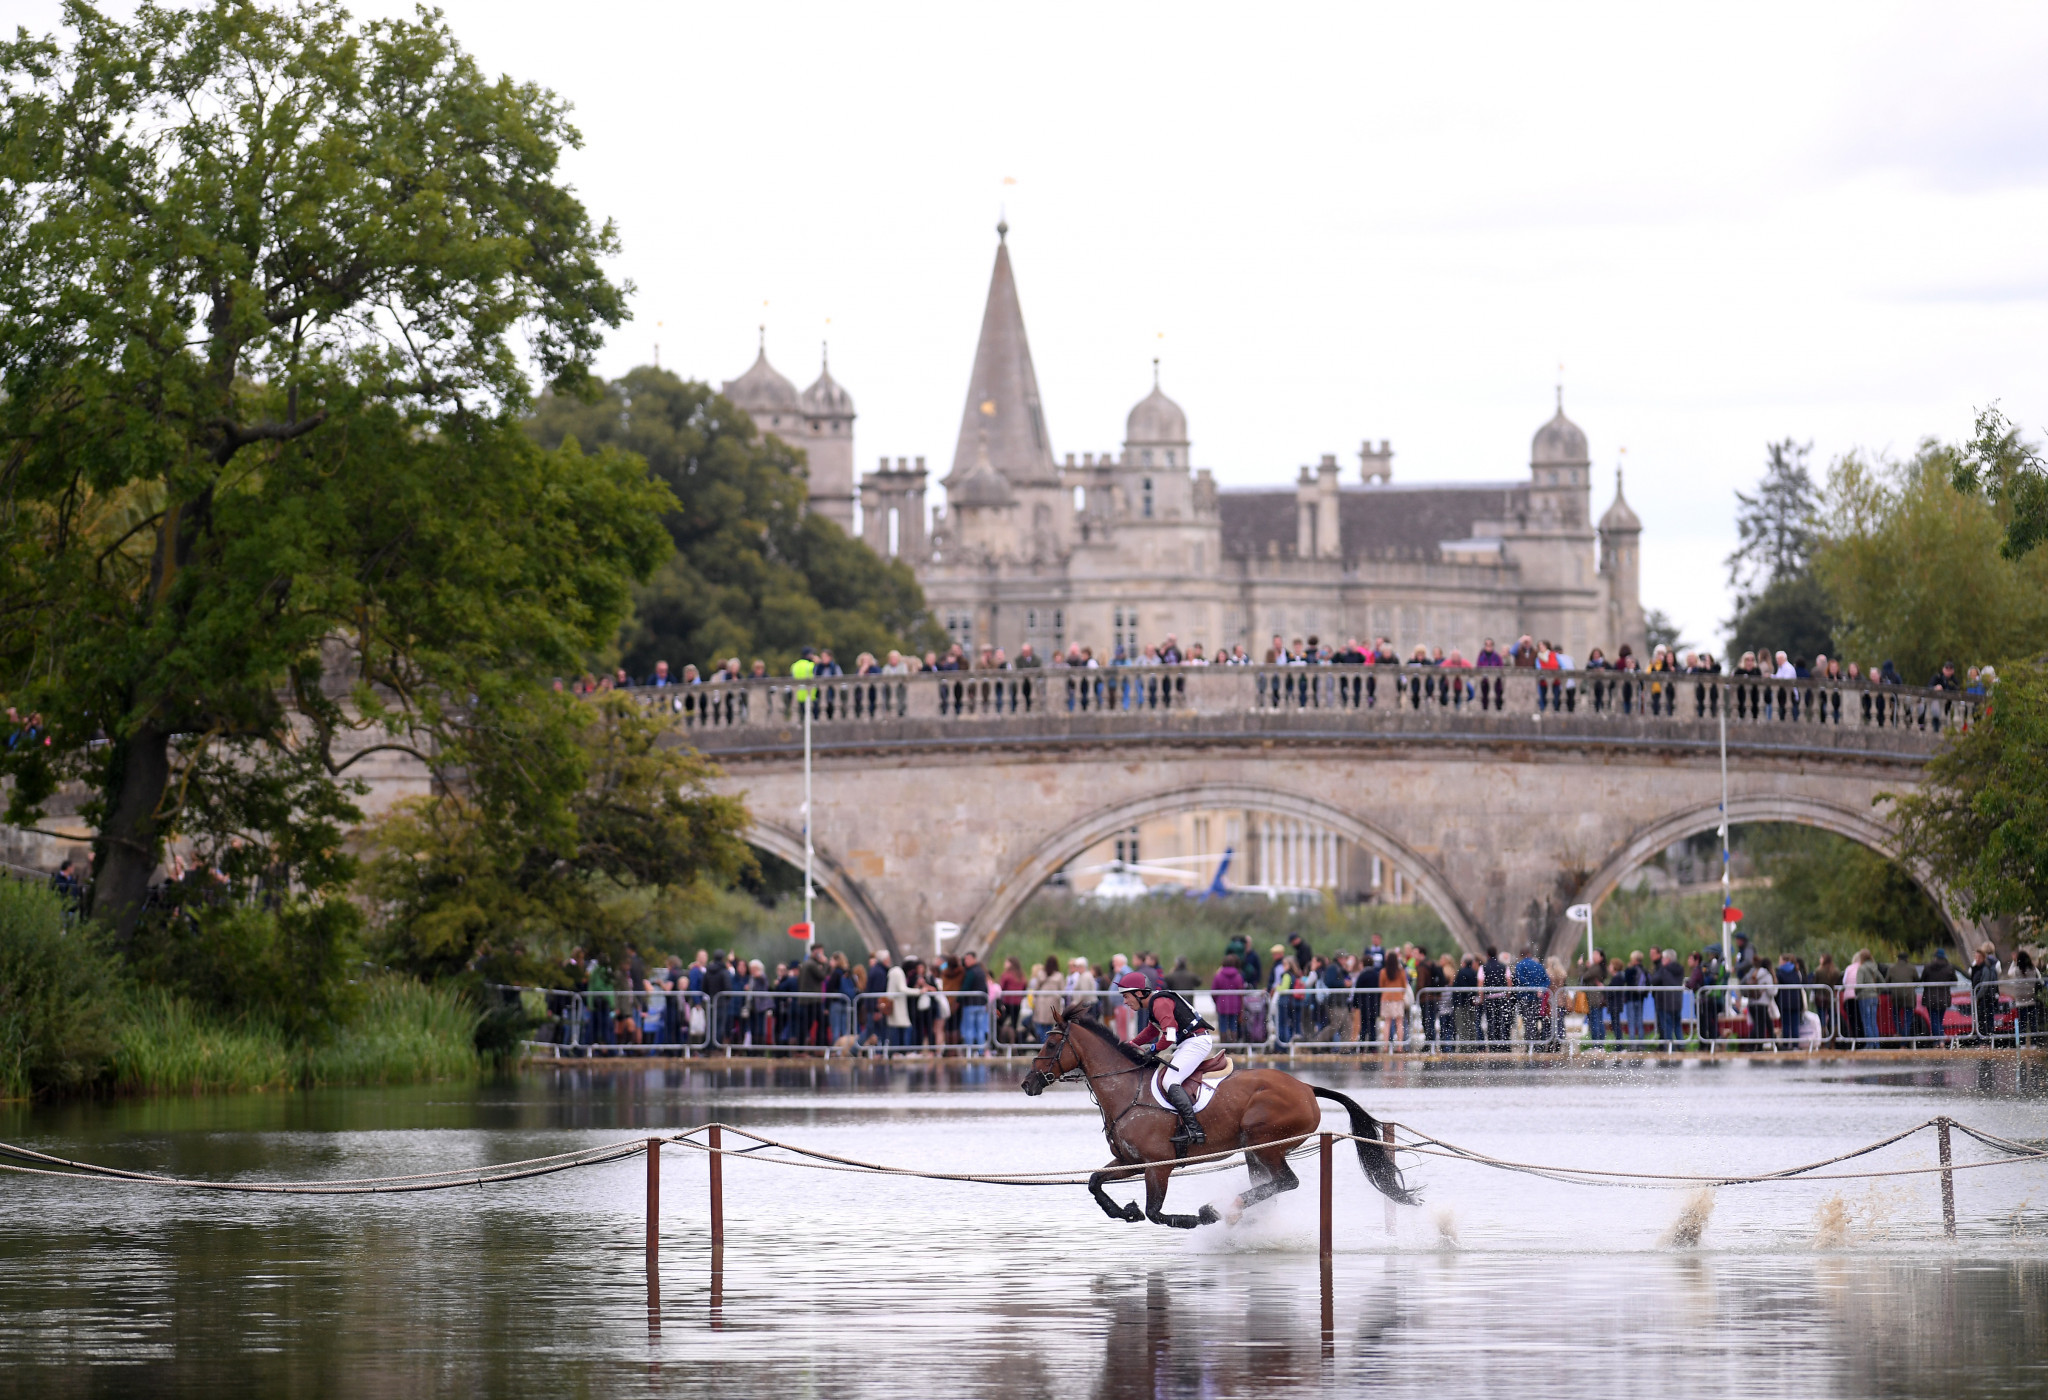 Burghley Horse Trials cancelled for second consecutive year over COVID-19